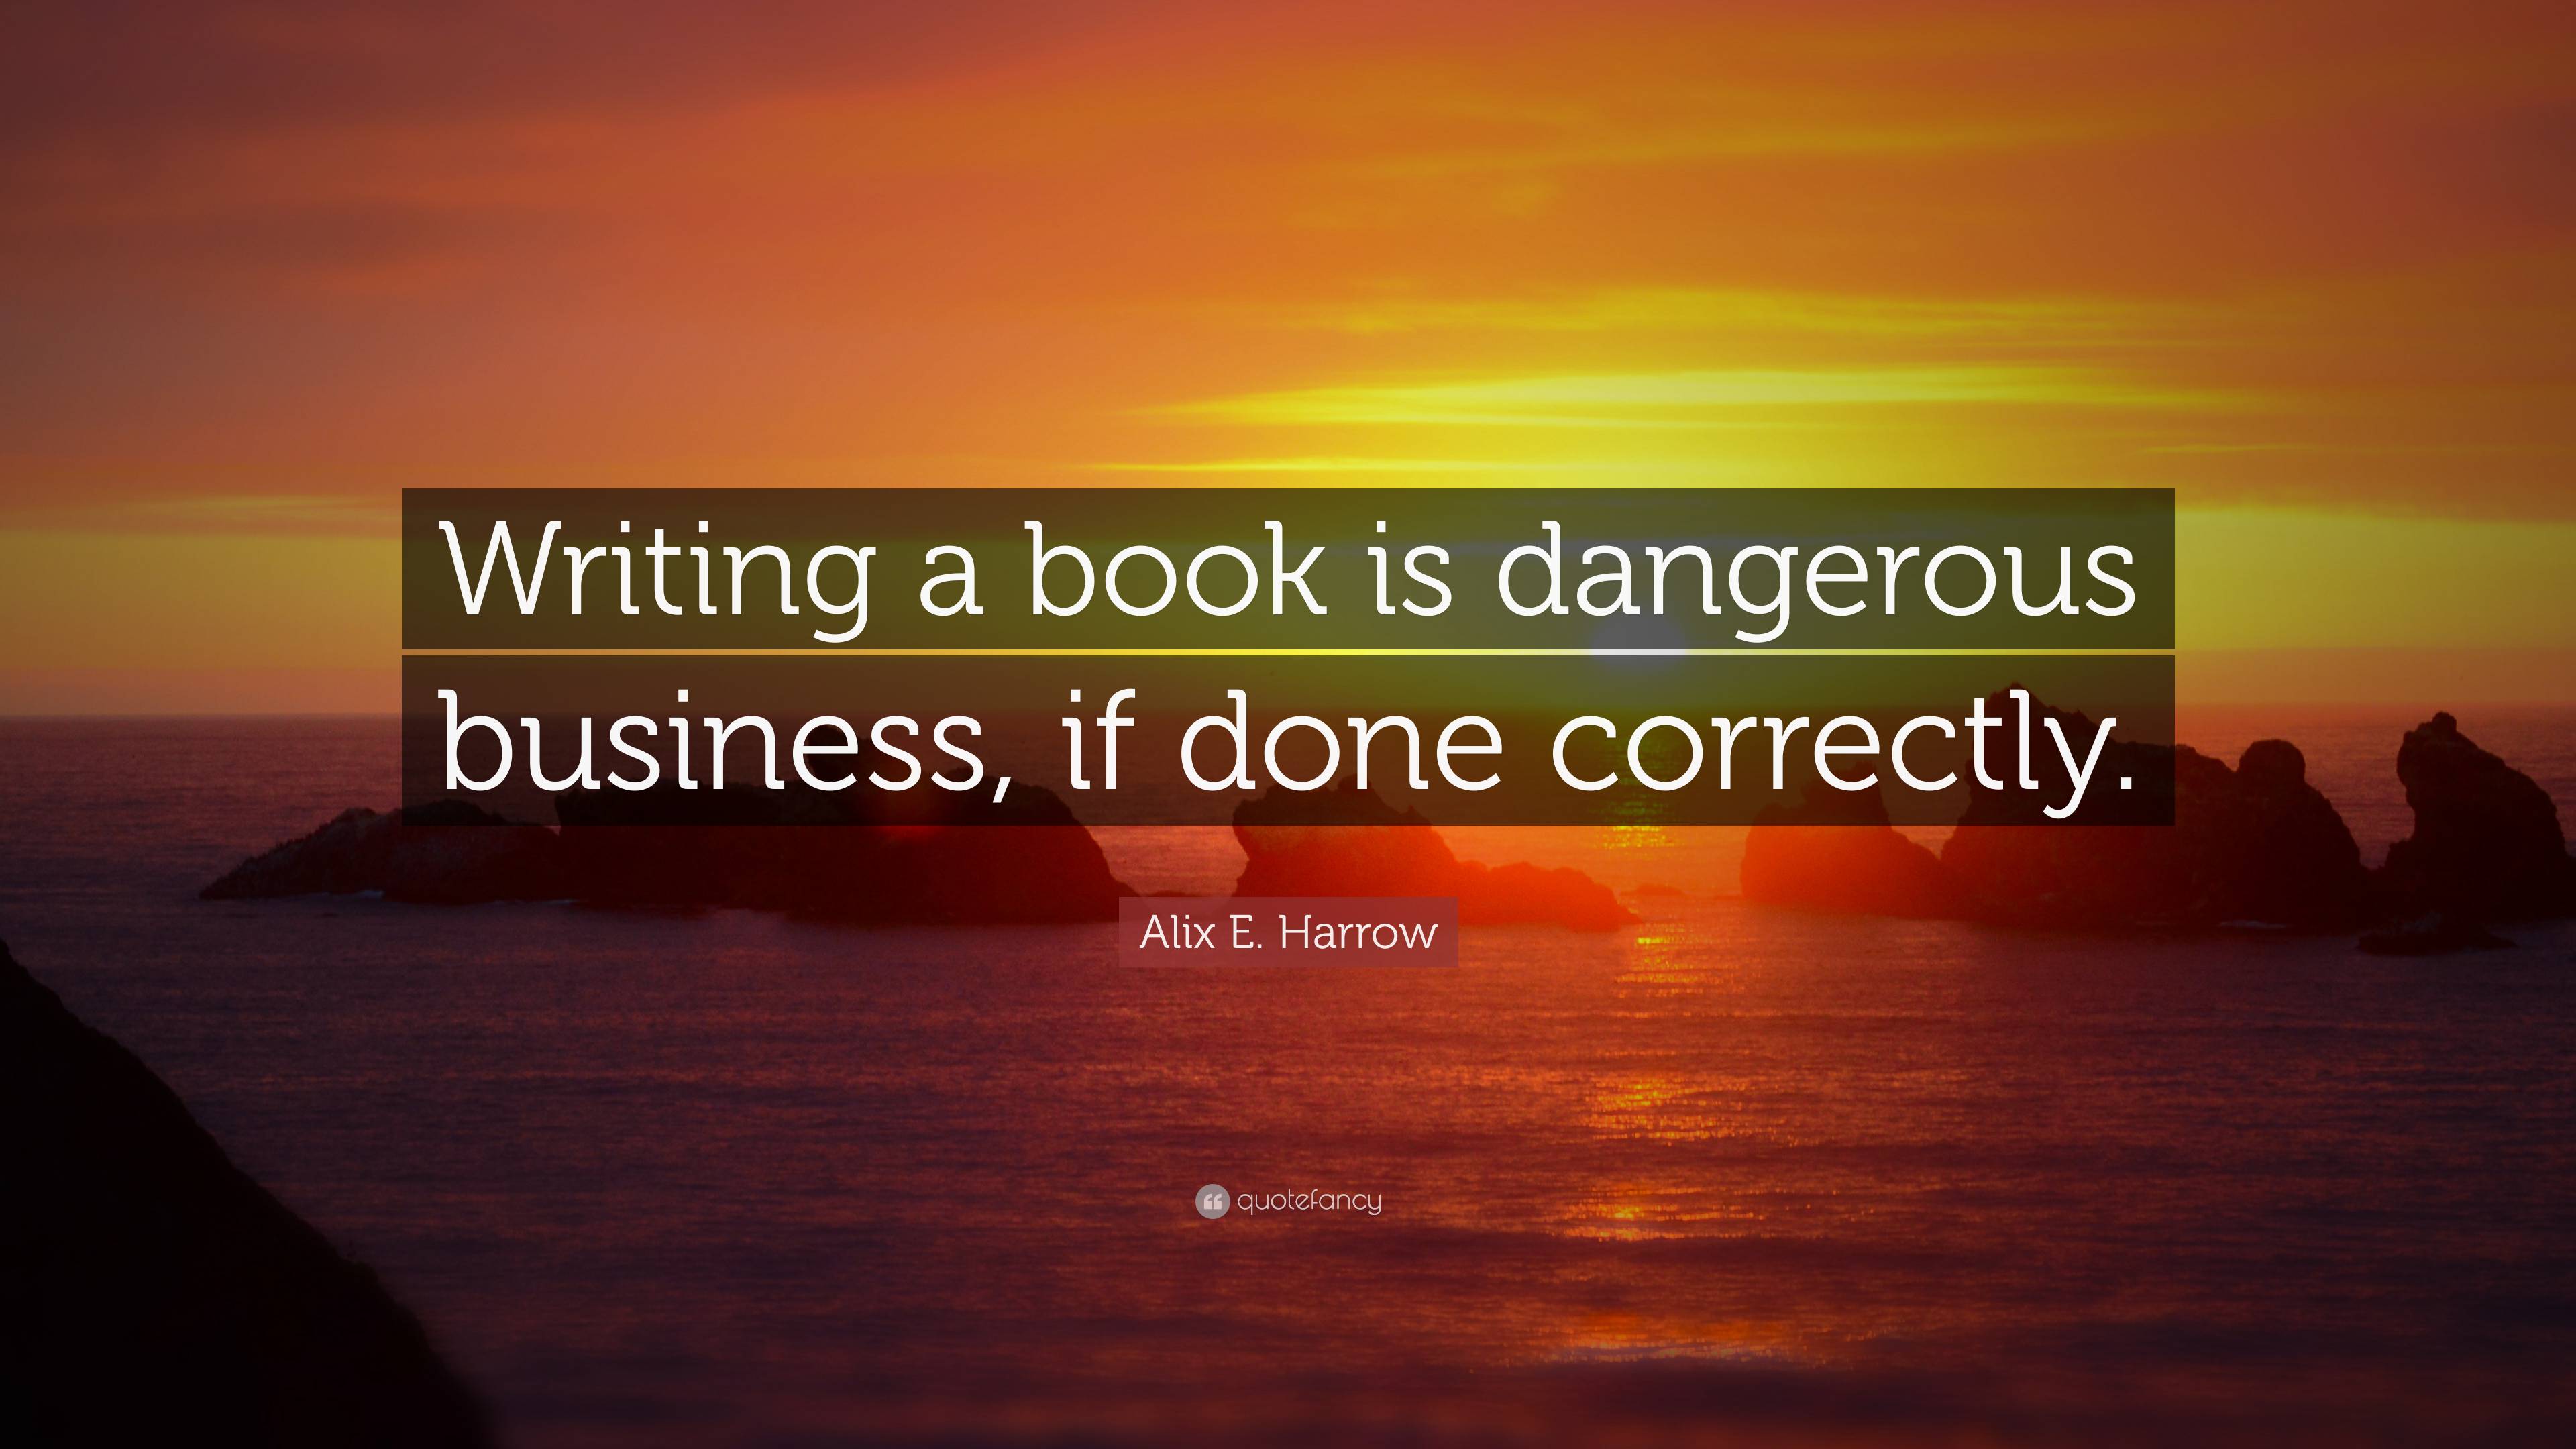 Alix E. Harrow Quote: “Writing a book is dangerous business, if done ...